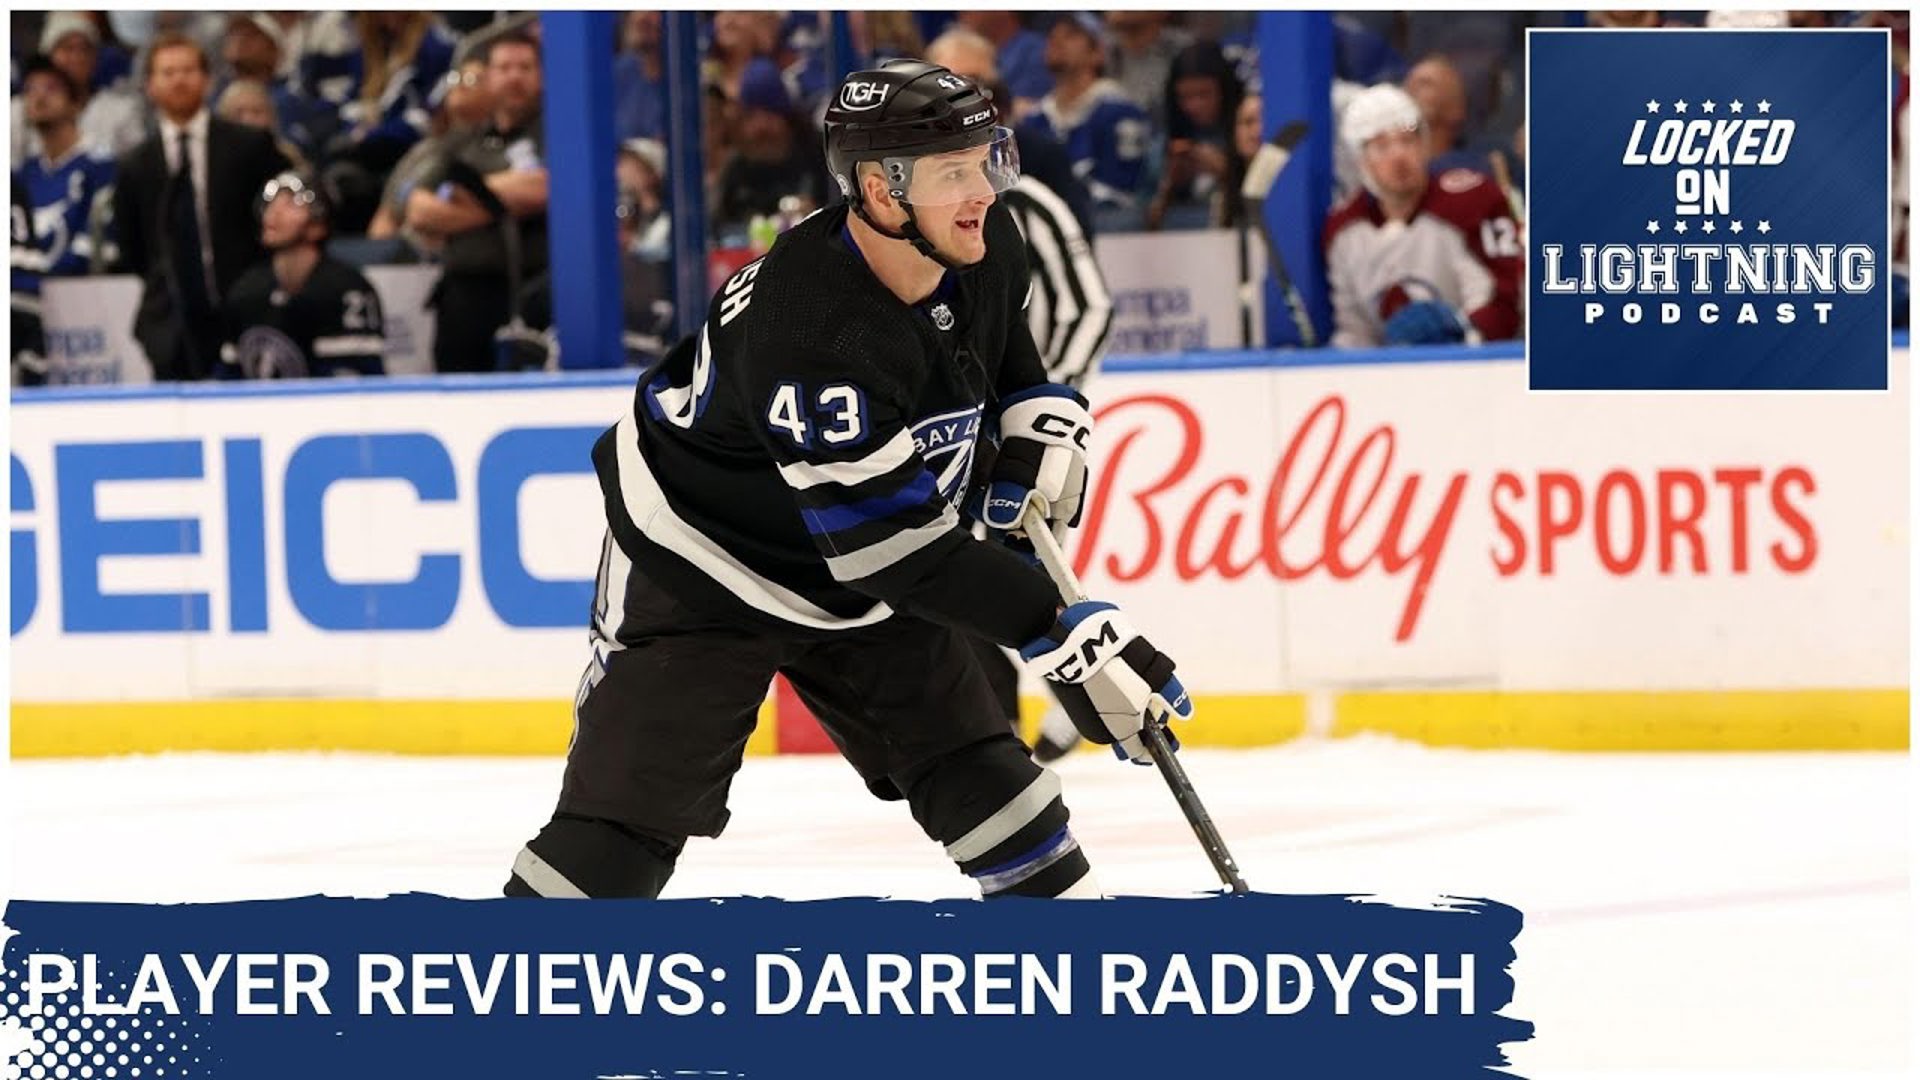 Darren Raddysh has really surprised a lot of Bolts nation with his play during his very short tenure at the NHL level.